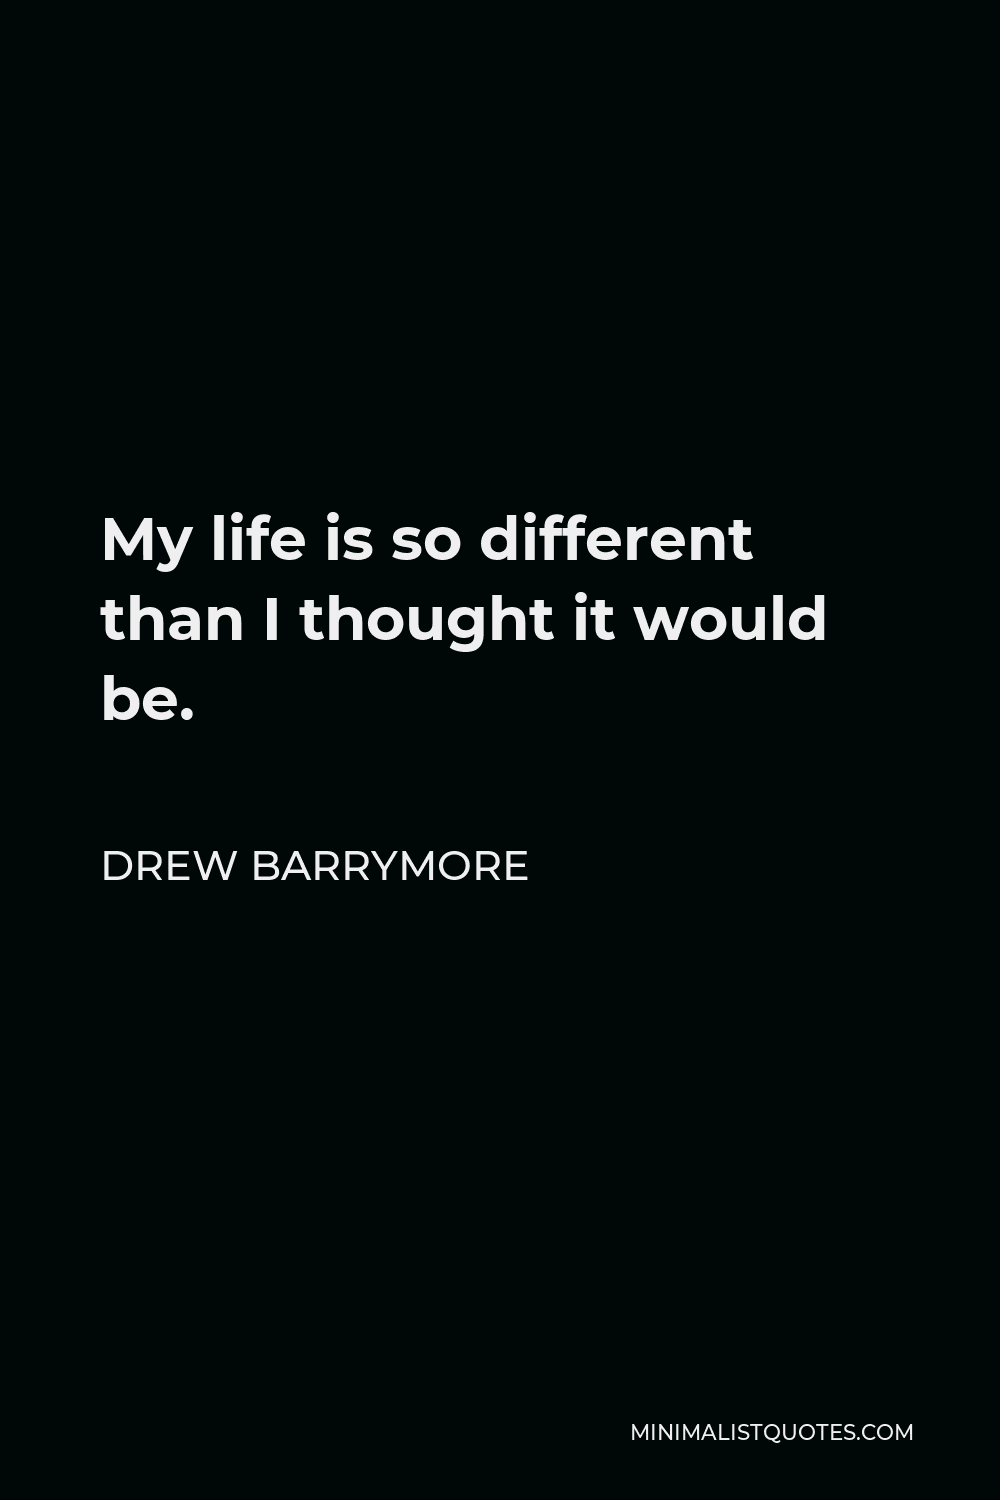 Drew Barrymore Quote - My life is so different than I thought it would be.